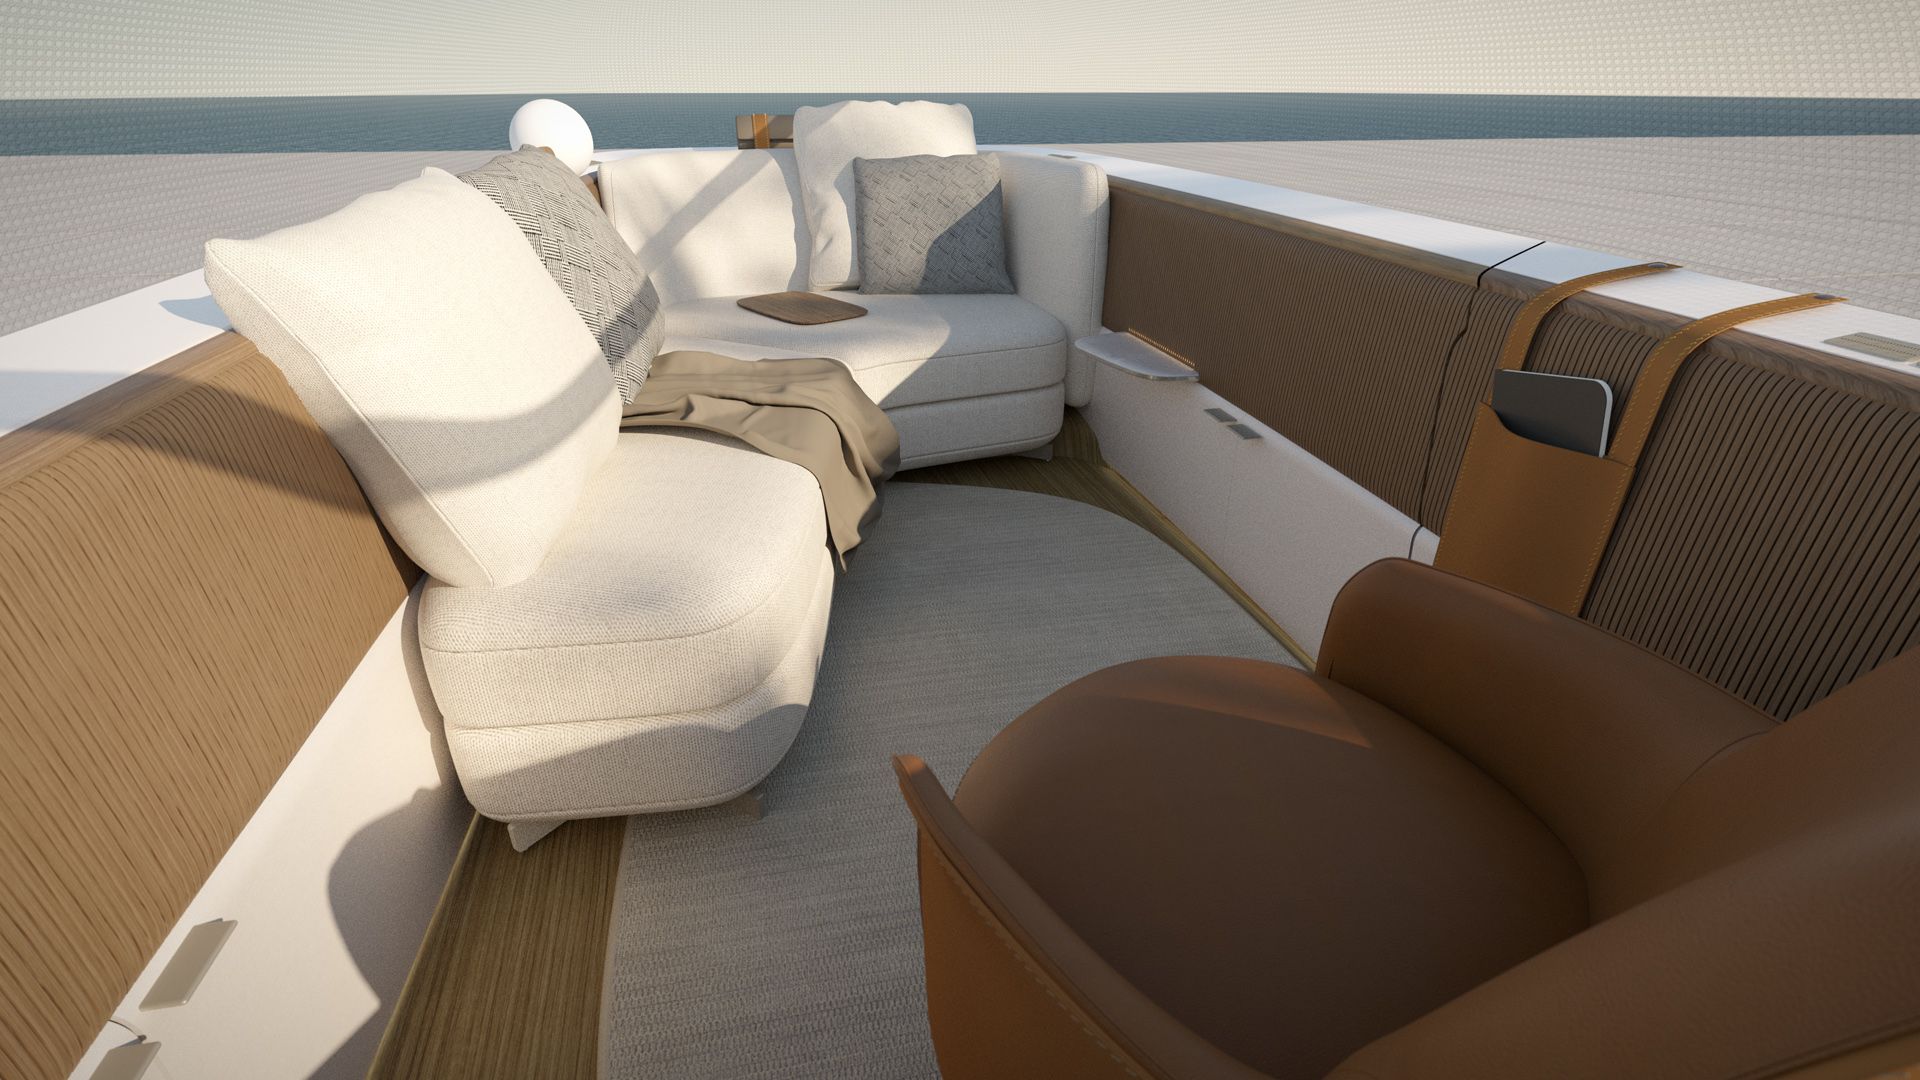 Poliform's interior design for the Audi urbansphere concept shows a cozy in-terior with various seating elements.